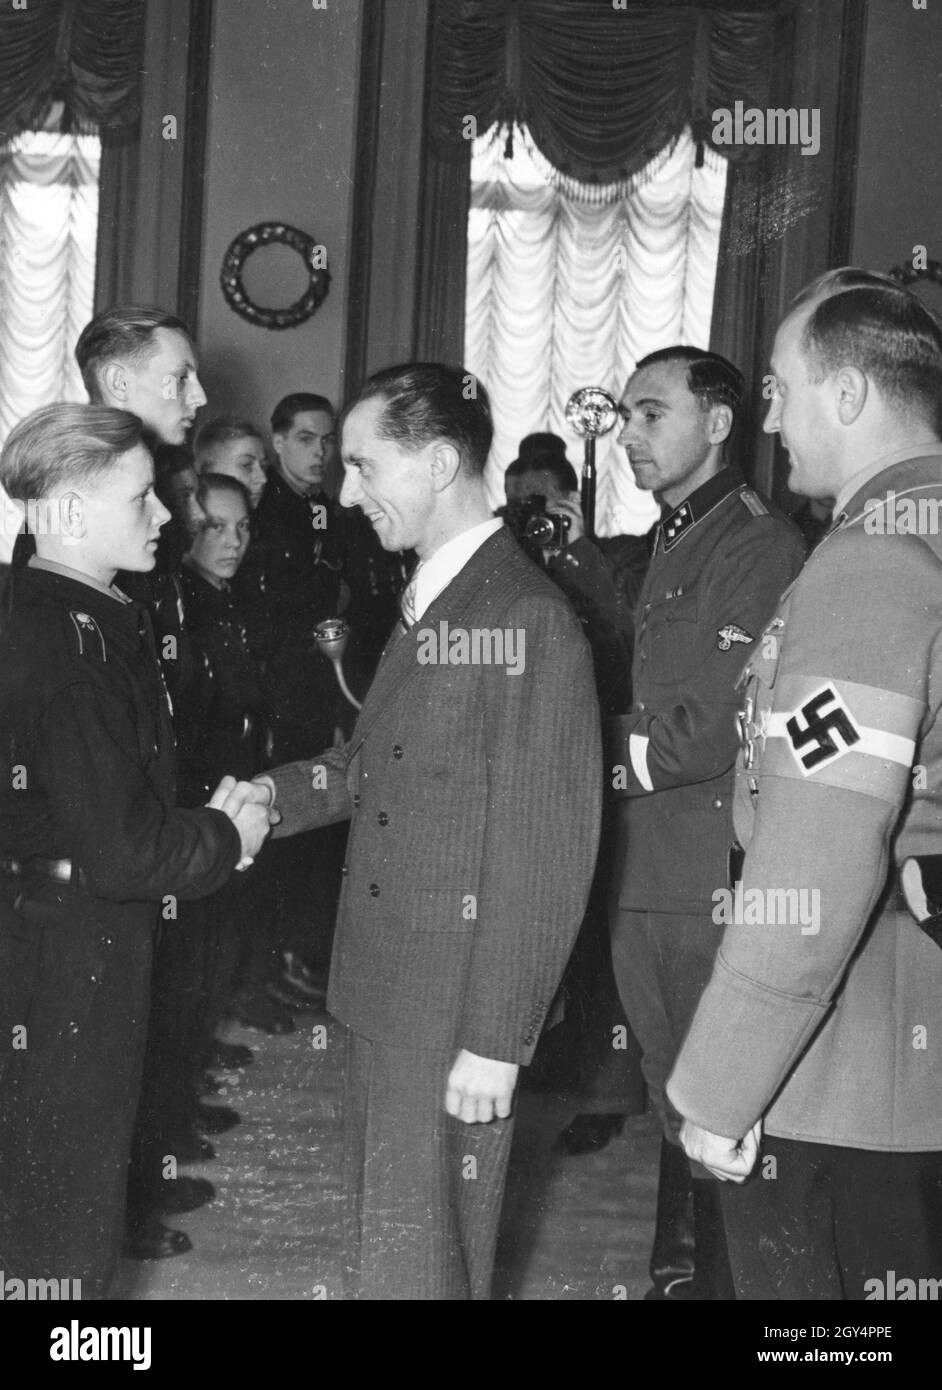 Propaganda Minister Joseph Goebbels (center) receives a number of Hitler Youth from the Rhineland who are awarded the Cross of War Merit or the Iron Cross 2nd Class for their bravery during the air raids on their city. To the right of Goebbels is Reich Youth Leader Axmann. [automated translation] Stock Photo